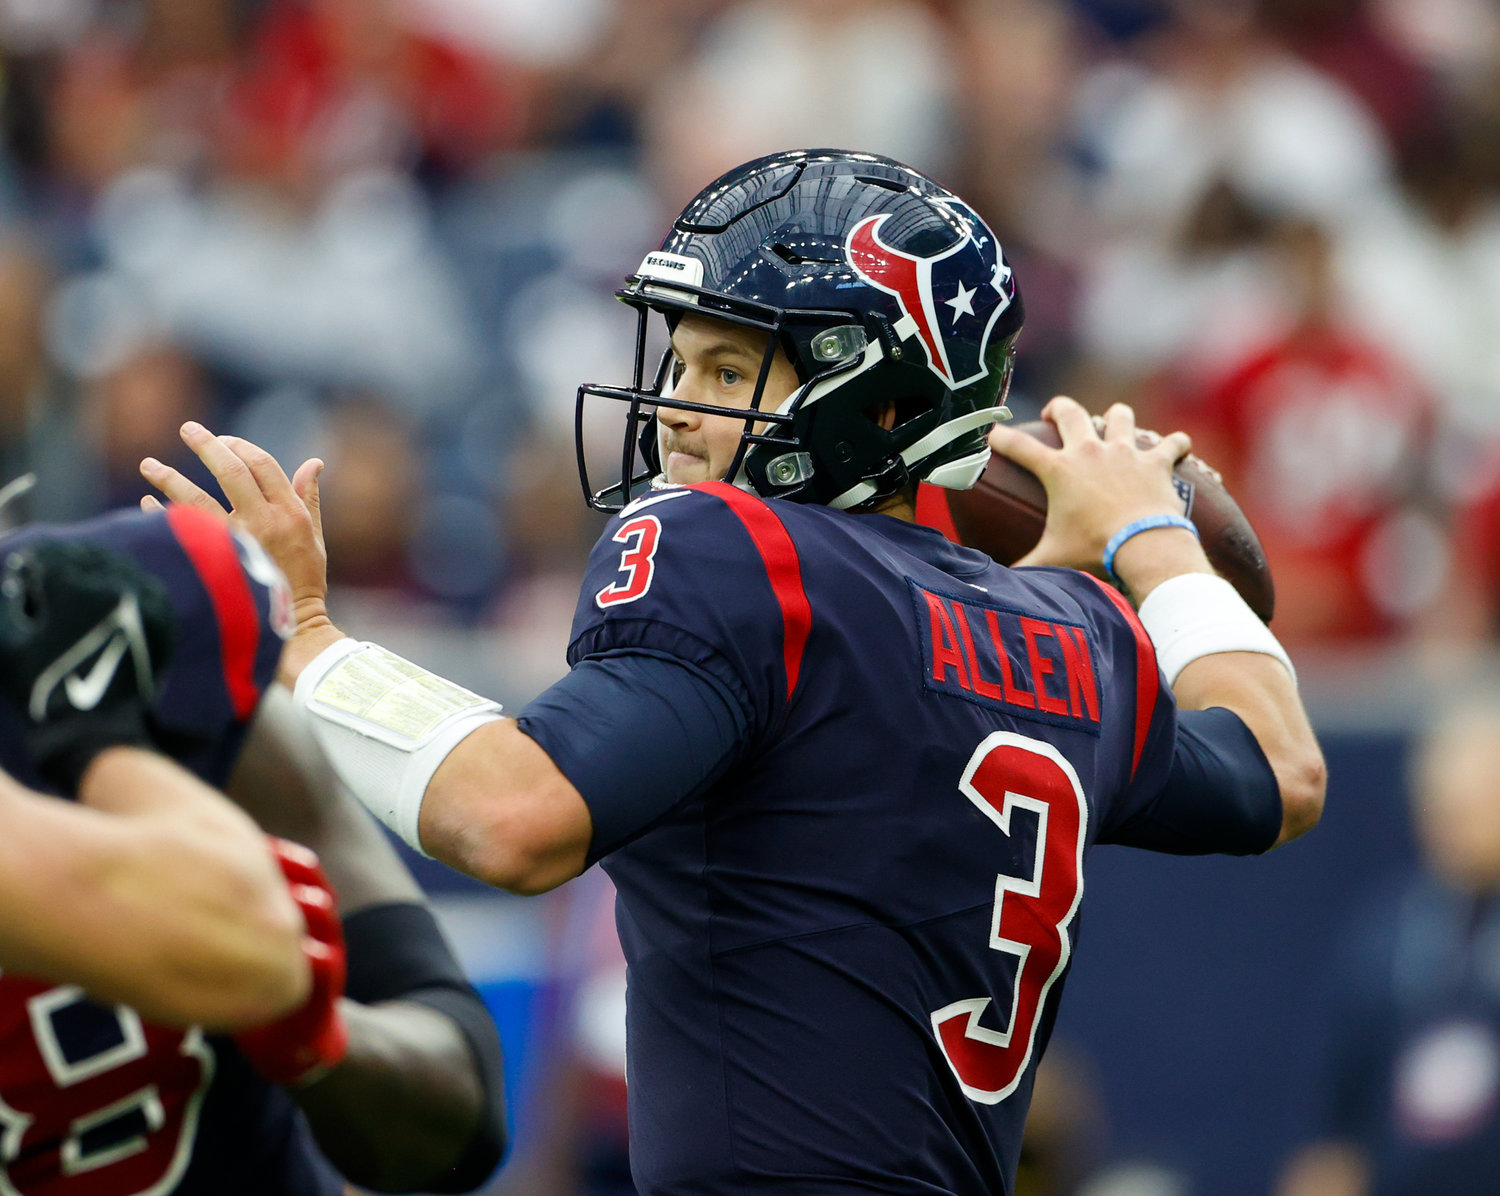 Houston Texans quarterback Kyle Allen (3) passes the ball during an NFL game between the Houston Texans and the Cleveland Browns on Dec. 4, 2022, in Houston. The Browns won, 27-14.